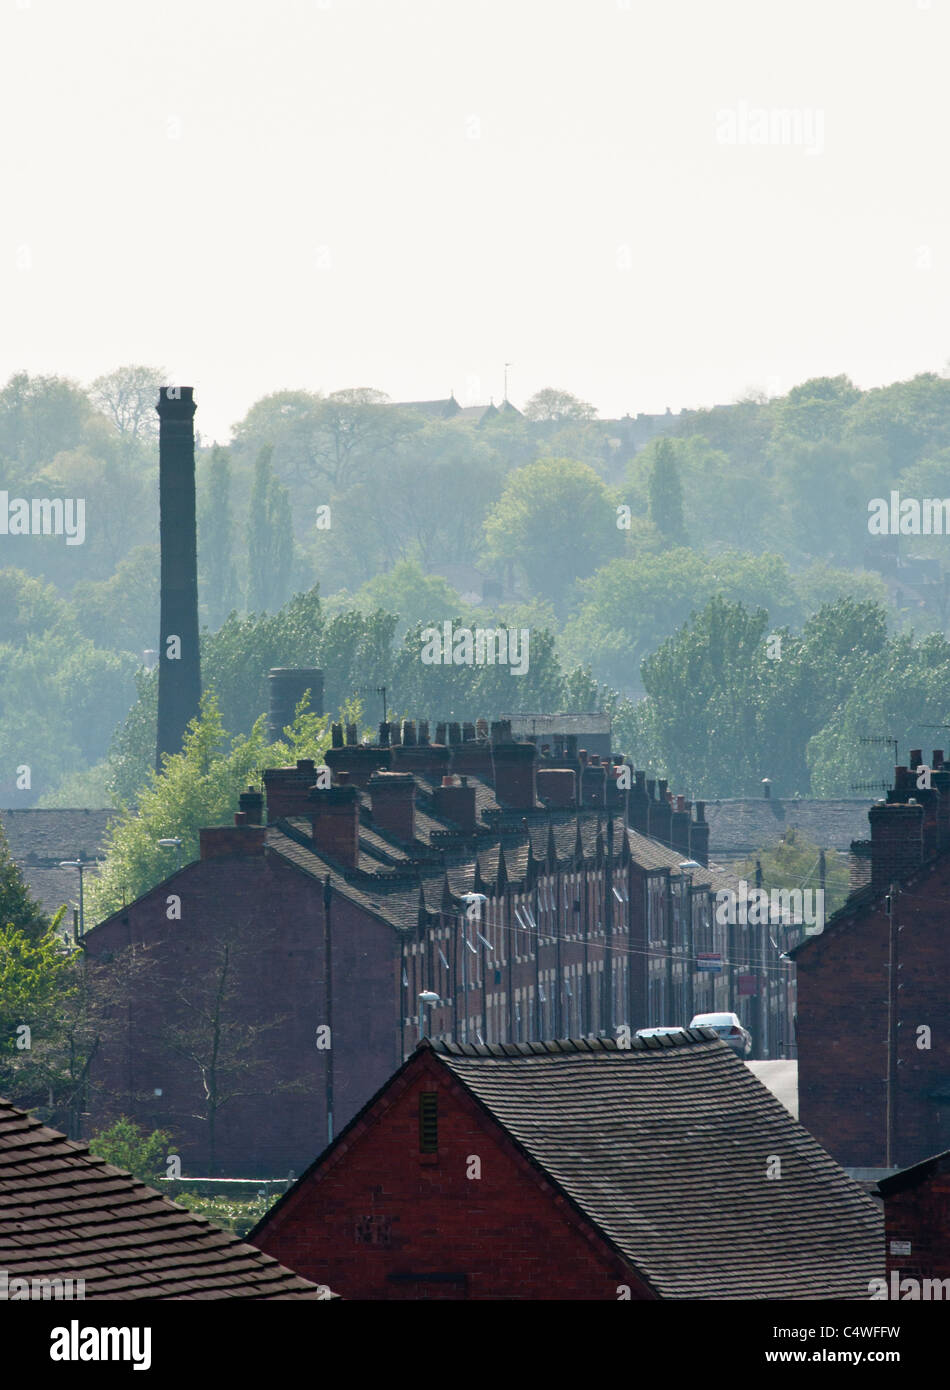 An urban landscape of Potteries factory housing in Middleport, Stoke-on-Trent, Staffordshire, England. Stock Photo